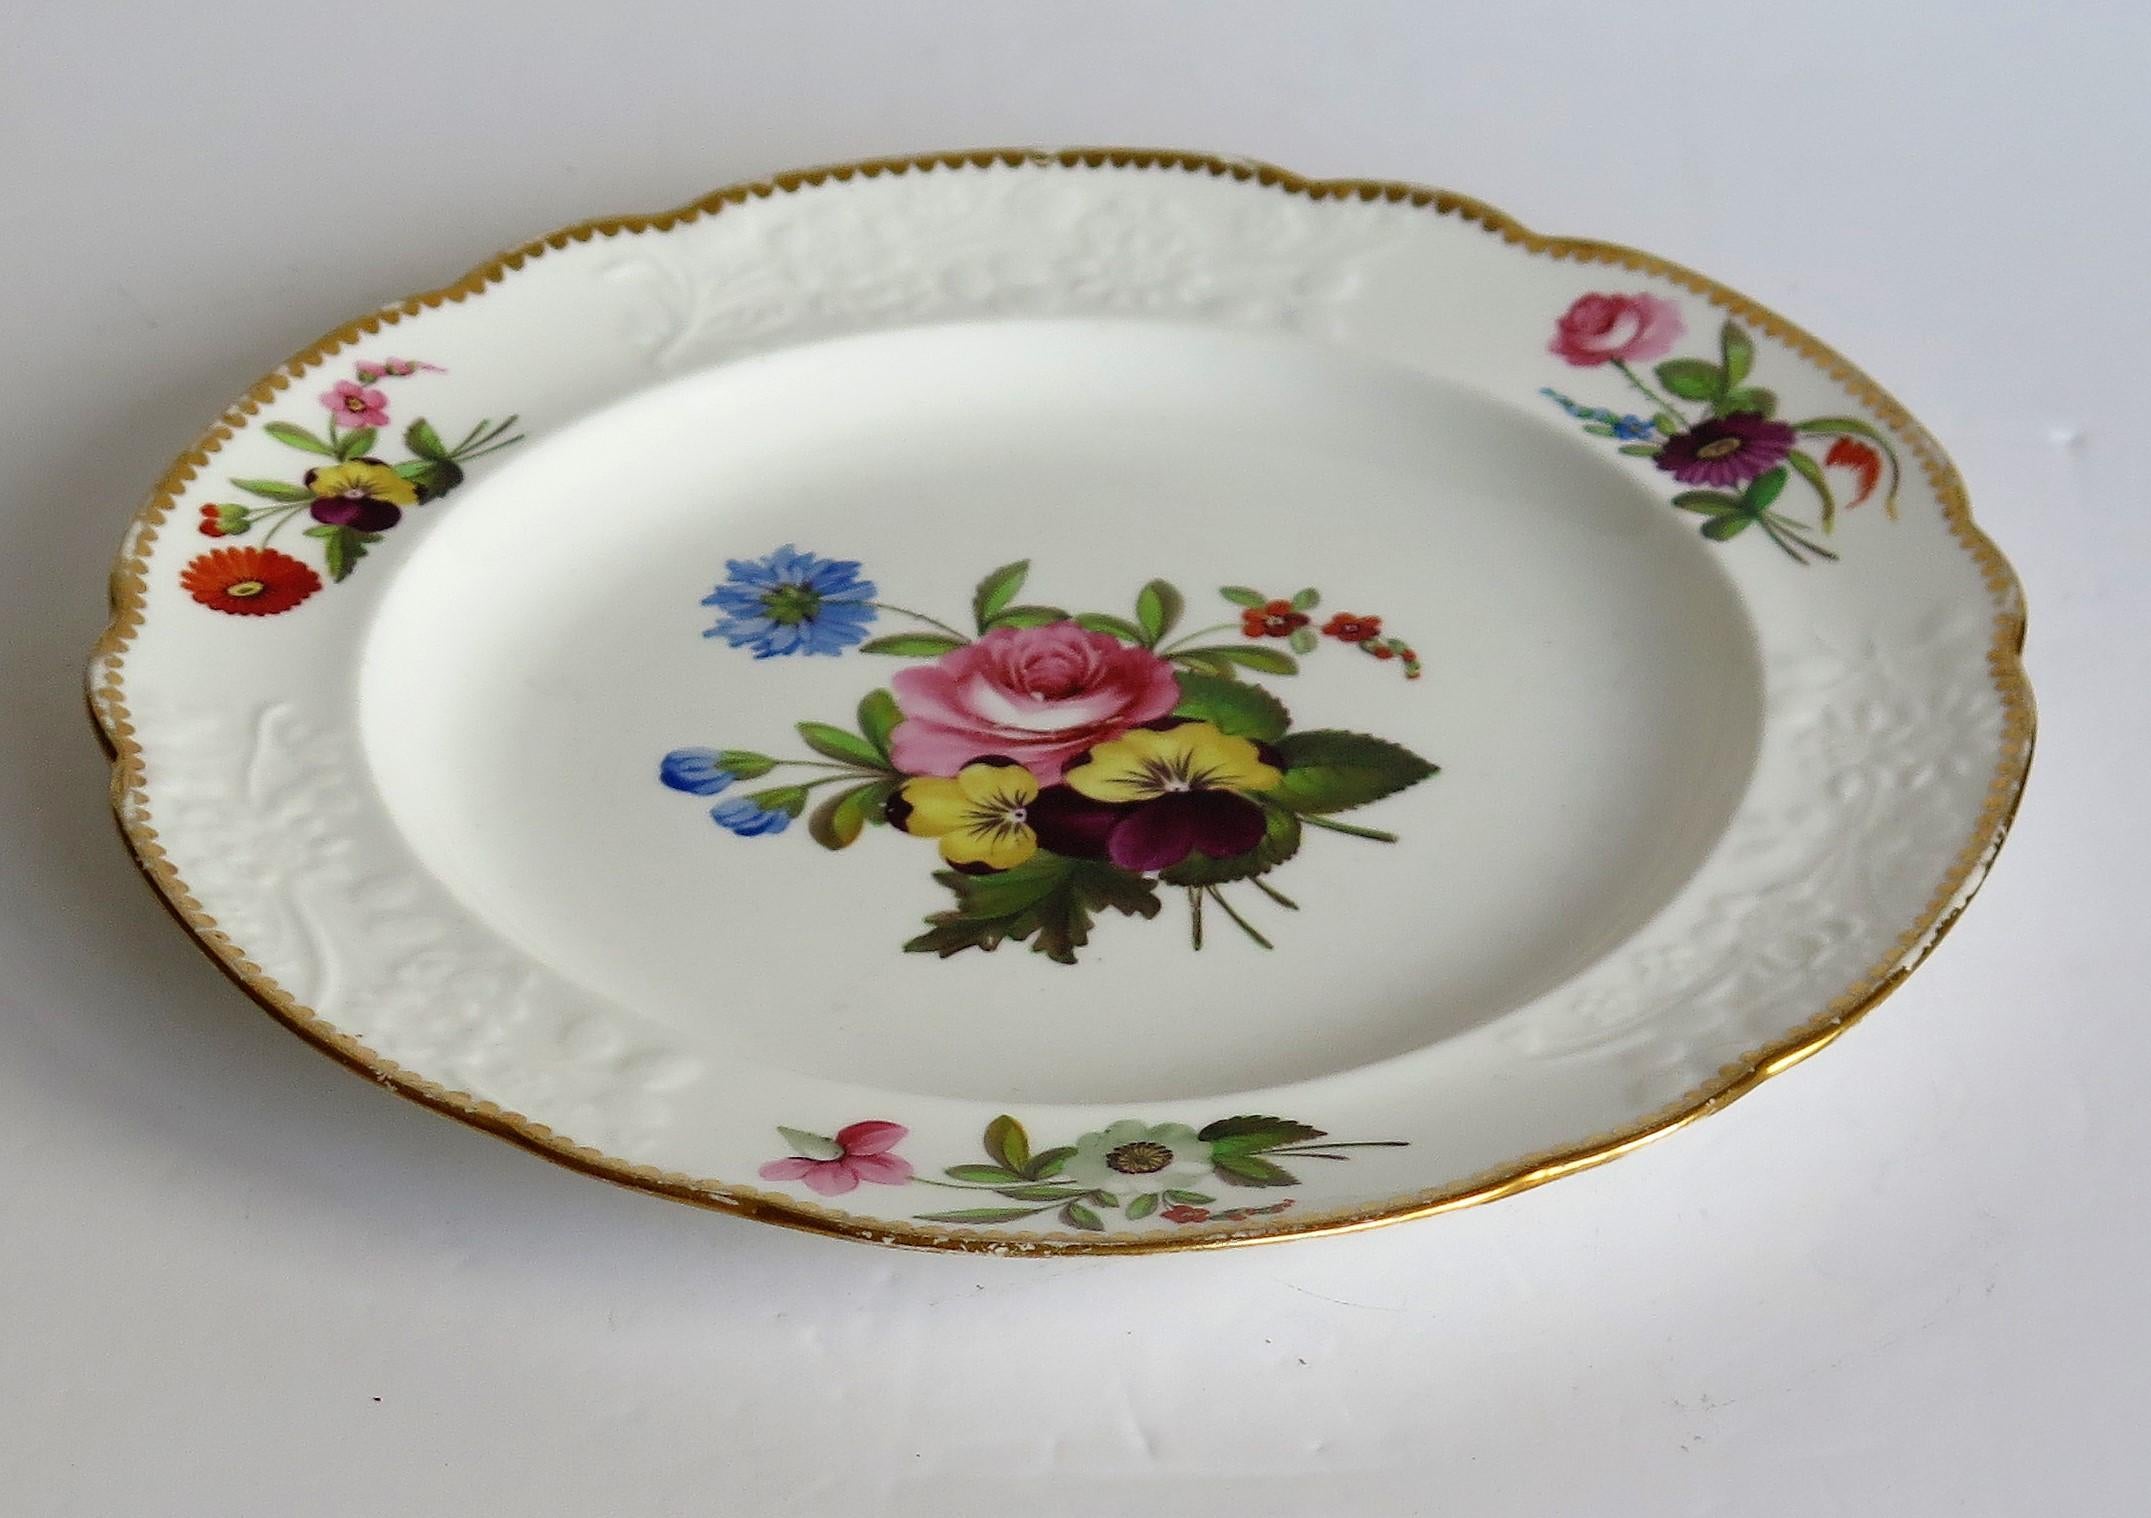 Georgian Porcelain Plate by Spode Hand Painted Botanical Ptn 3127, circa 1820 For Sale 2